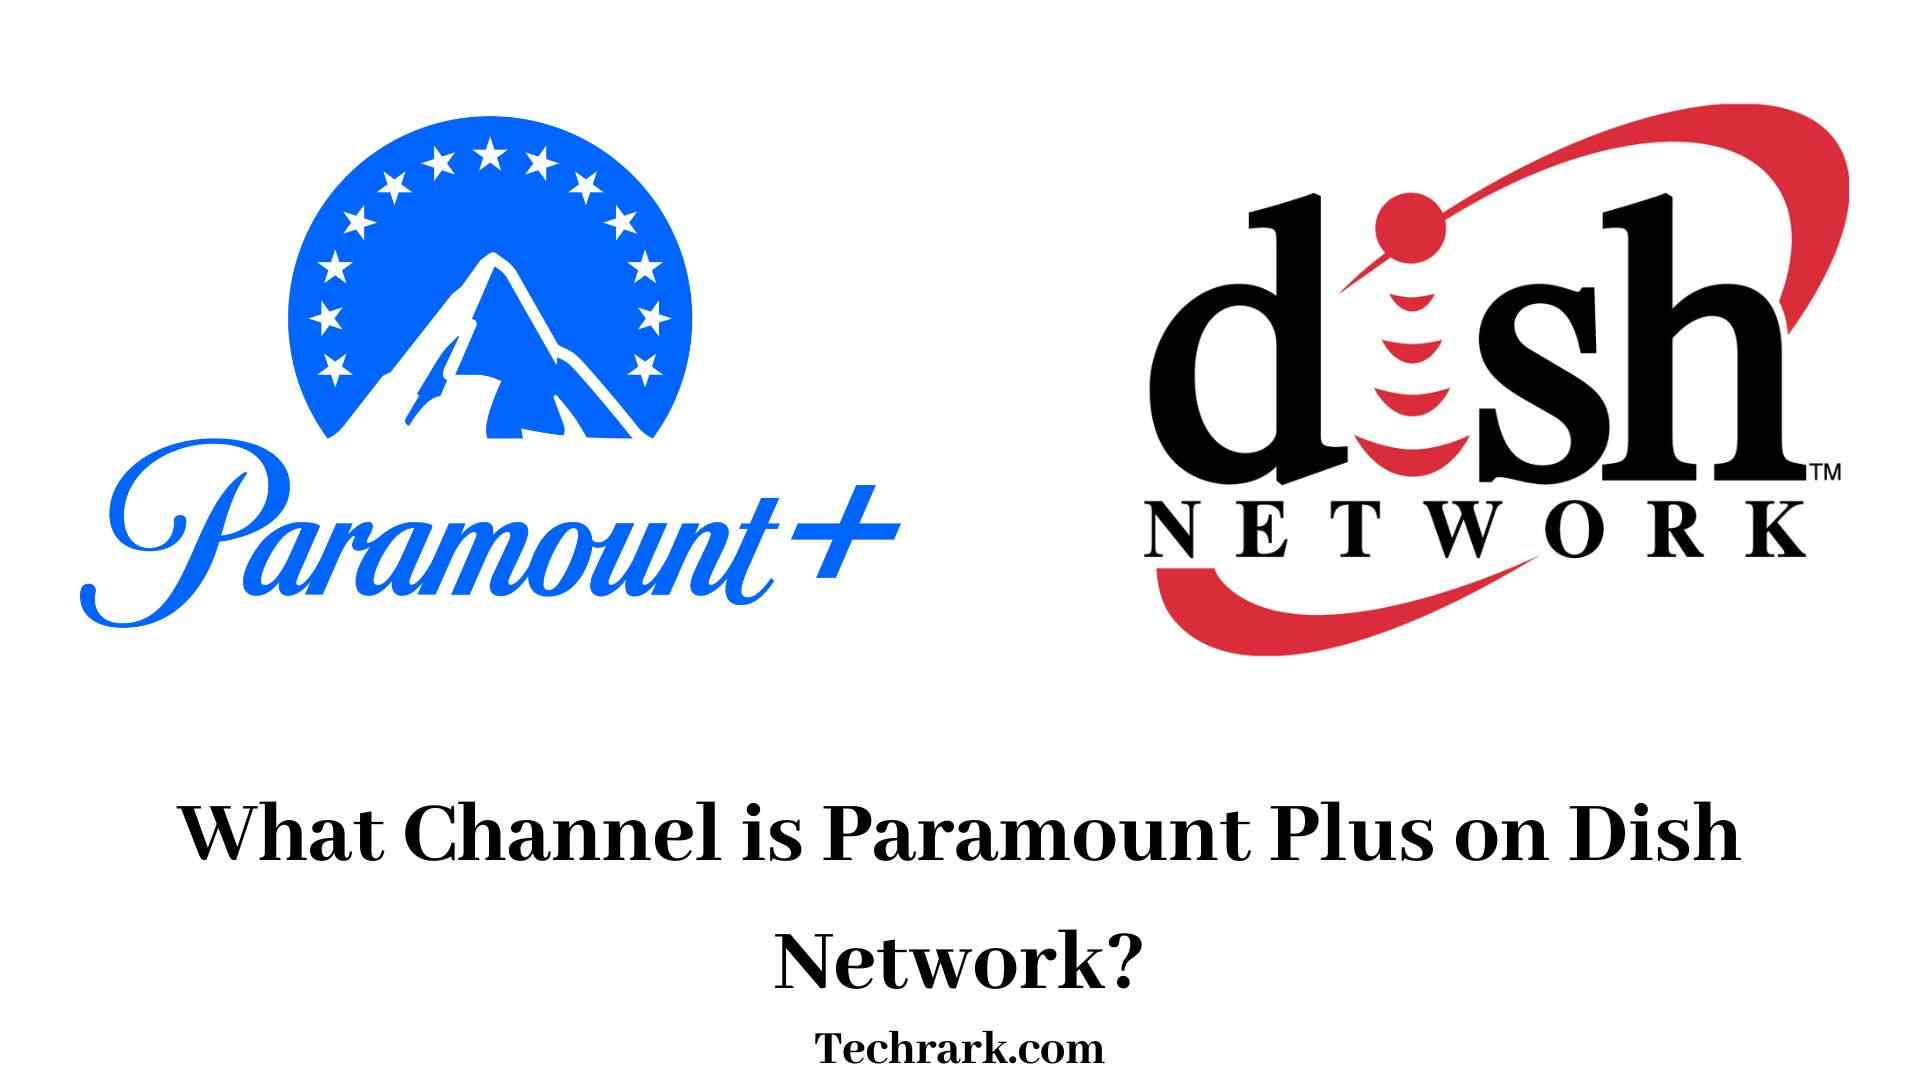 What Channel is Paramount Plus on Dish